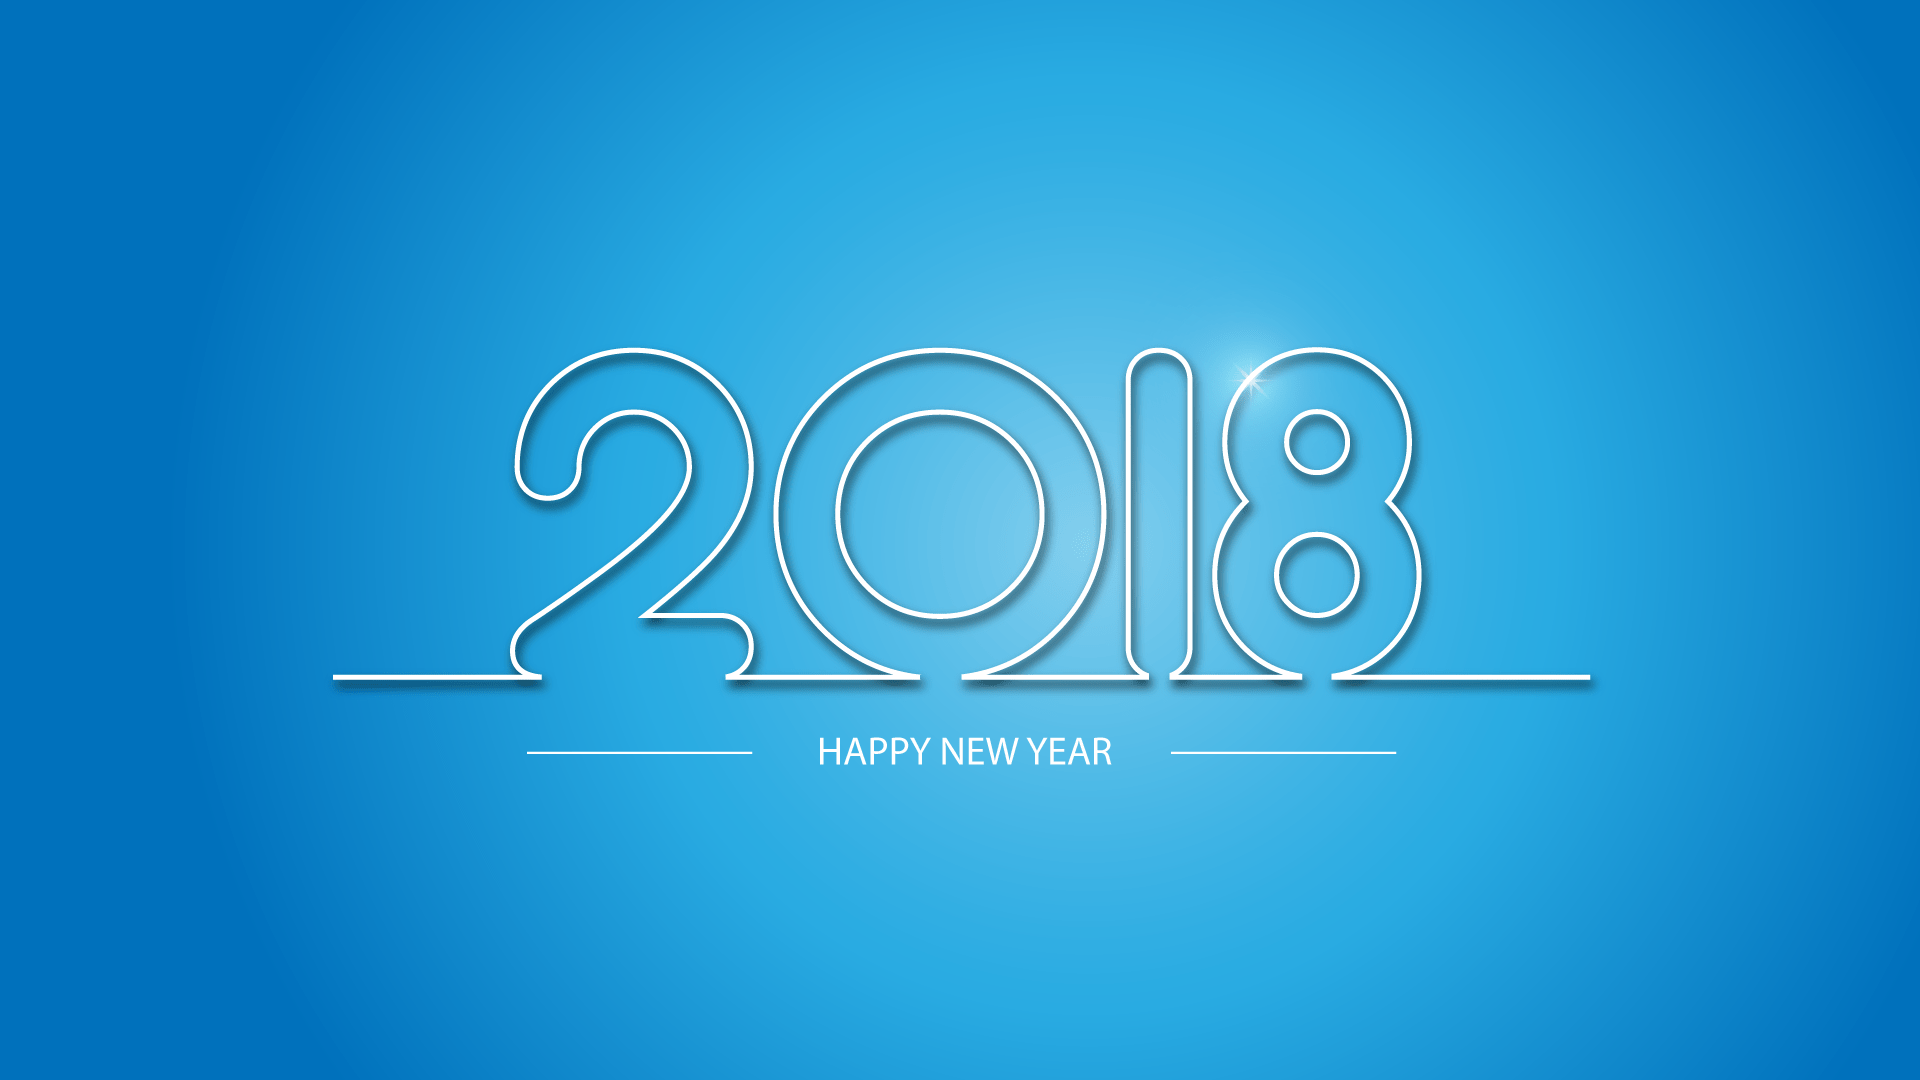 How To Make A Happy New Year Wallpaper